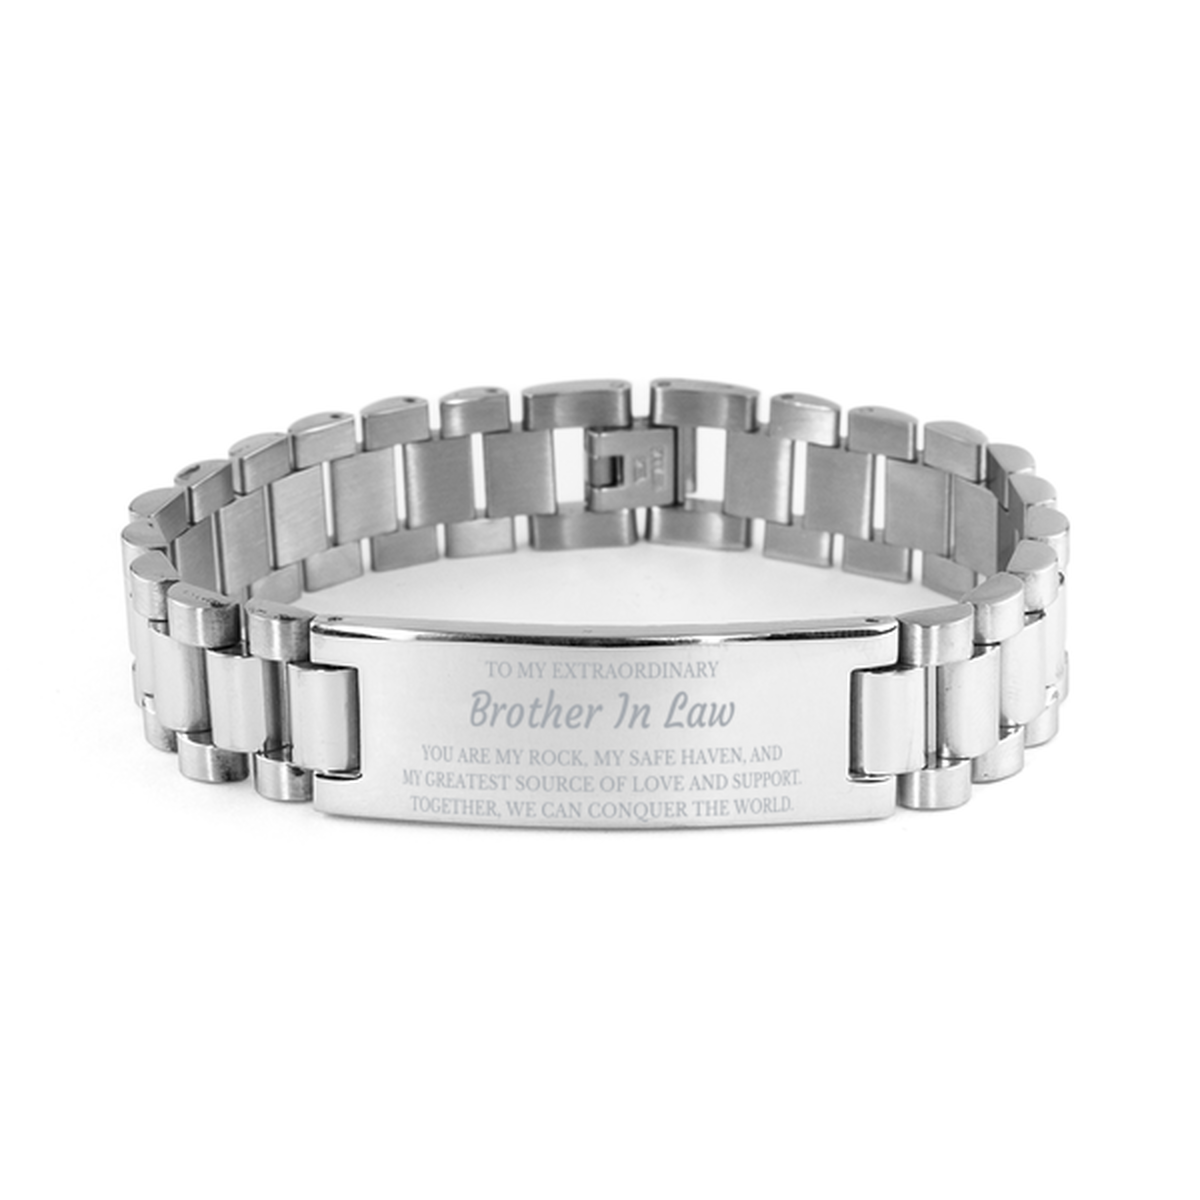 To My Extraordinary Brother In Law Gifts, Together, we can conquer the world, Birthday Ladder Stainless Steel Bracelet For Brother In Law, Christmas Gifts For Brother In Law